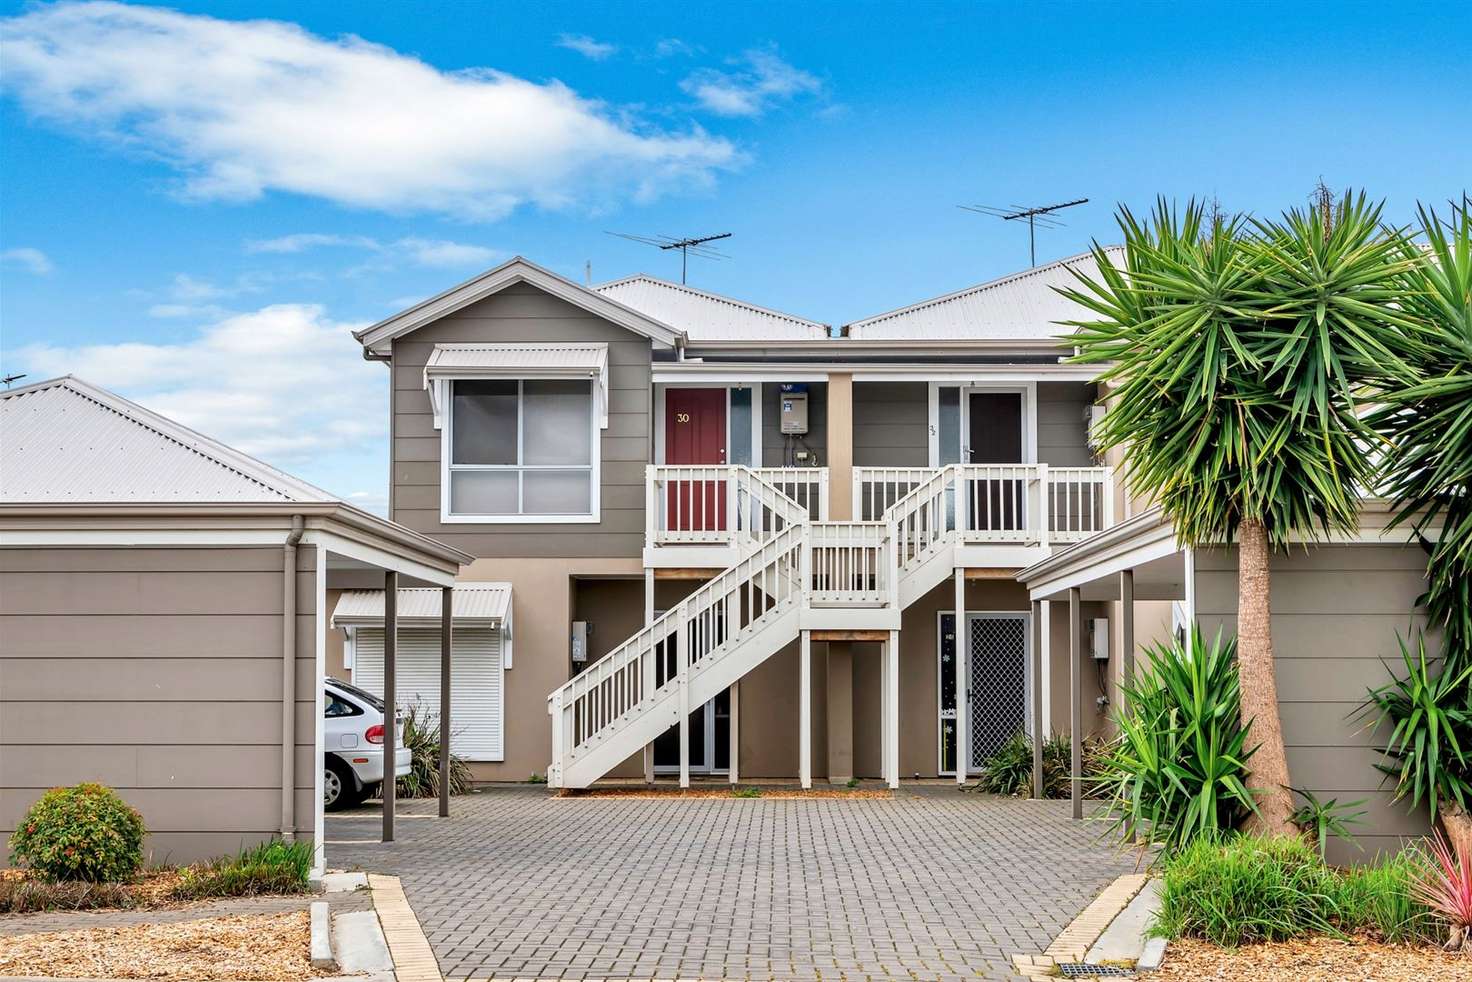 Main view of Homely apartment listing, 32 Douglas Street, Ferryden Park SA 5010